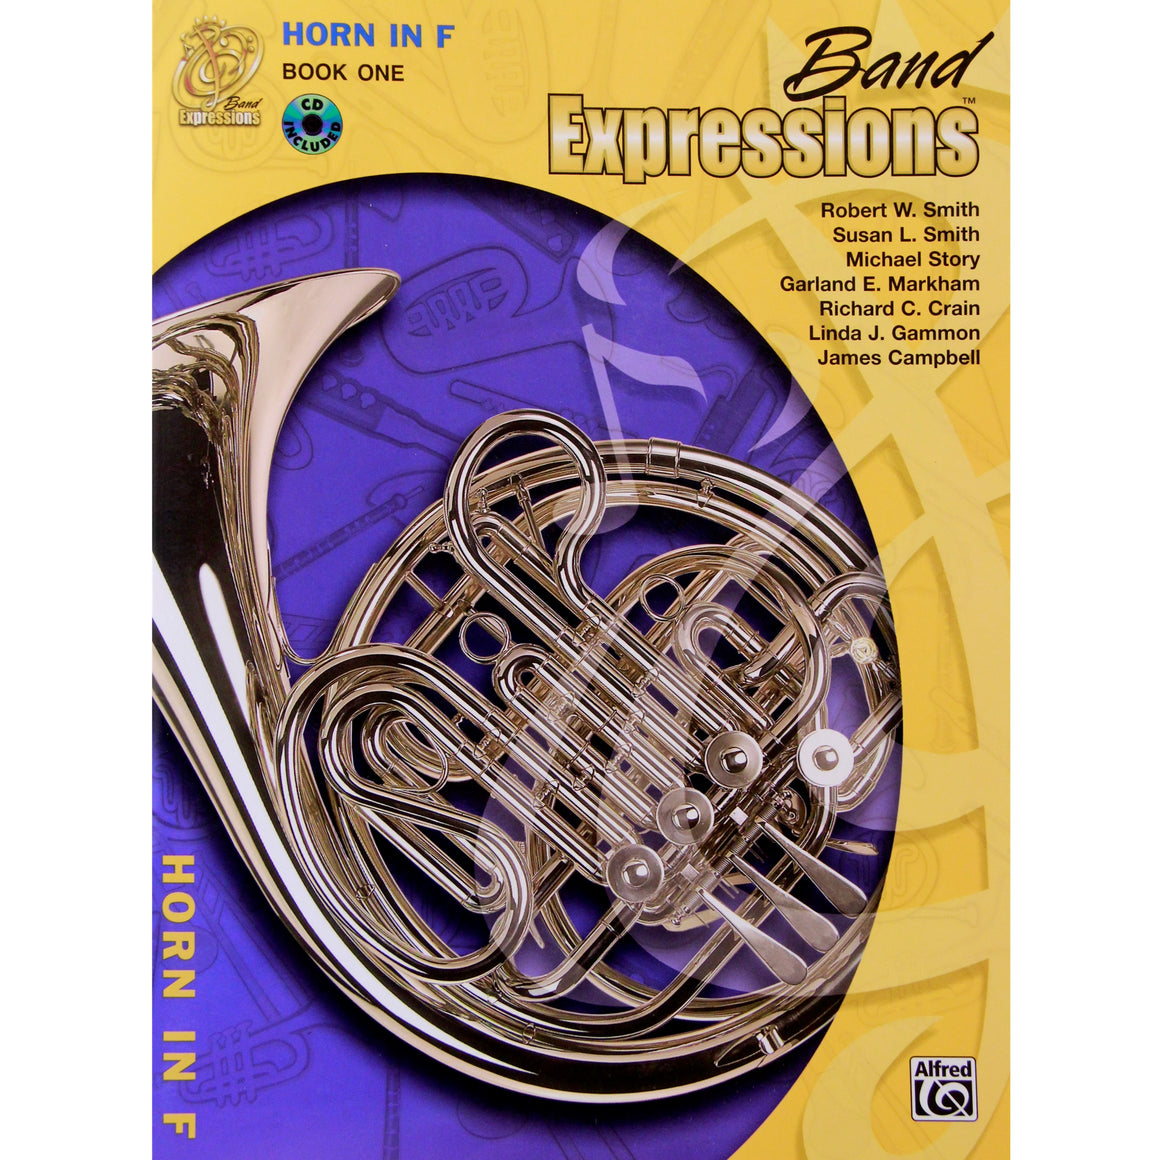 ALFRED 00MCB1012CDX Band Expressions , Book One: Student Edition [Horn in F]